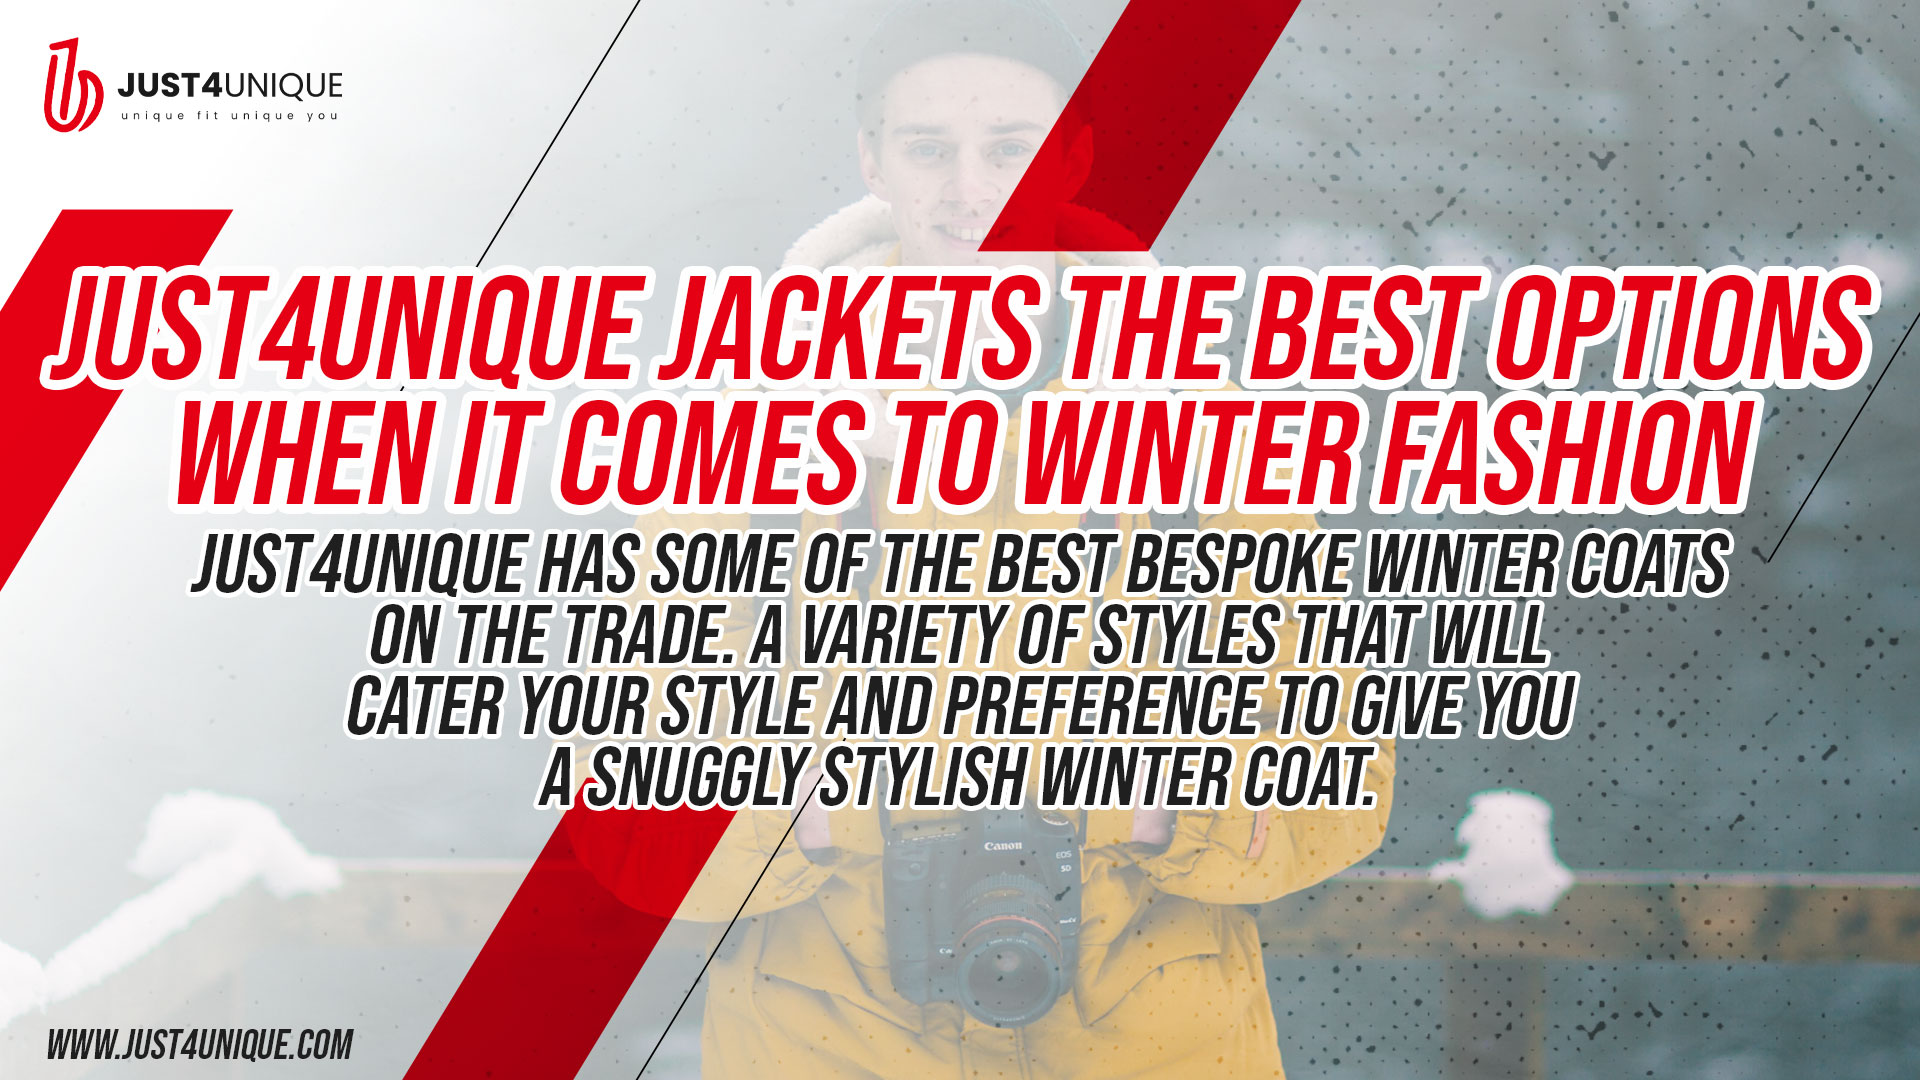 Just4unique Jackets The Best Options When it comes to Winter Fashion